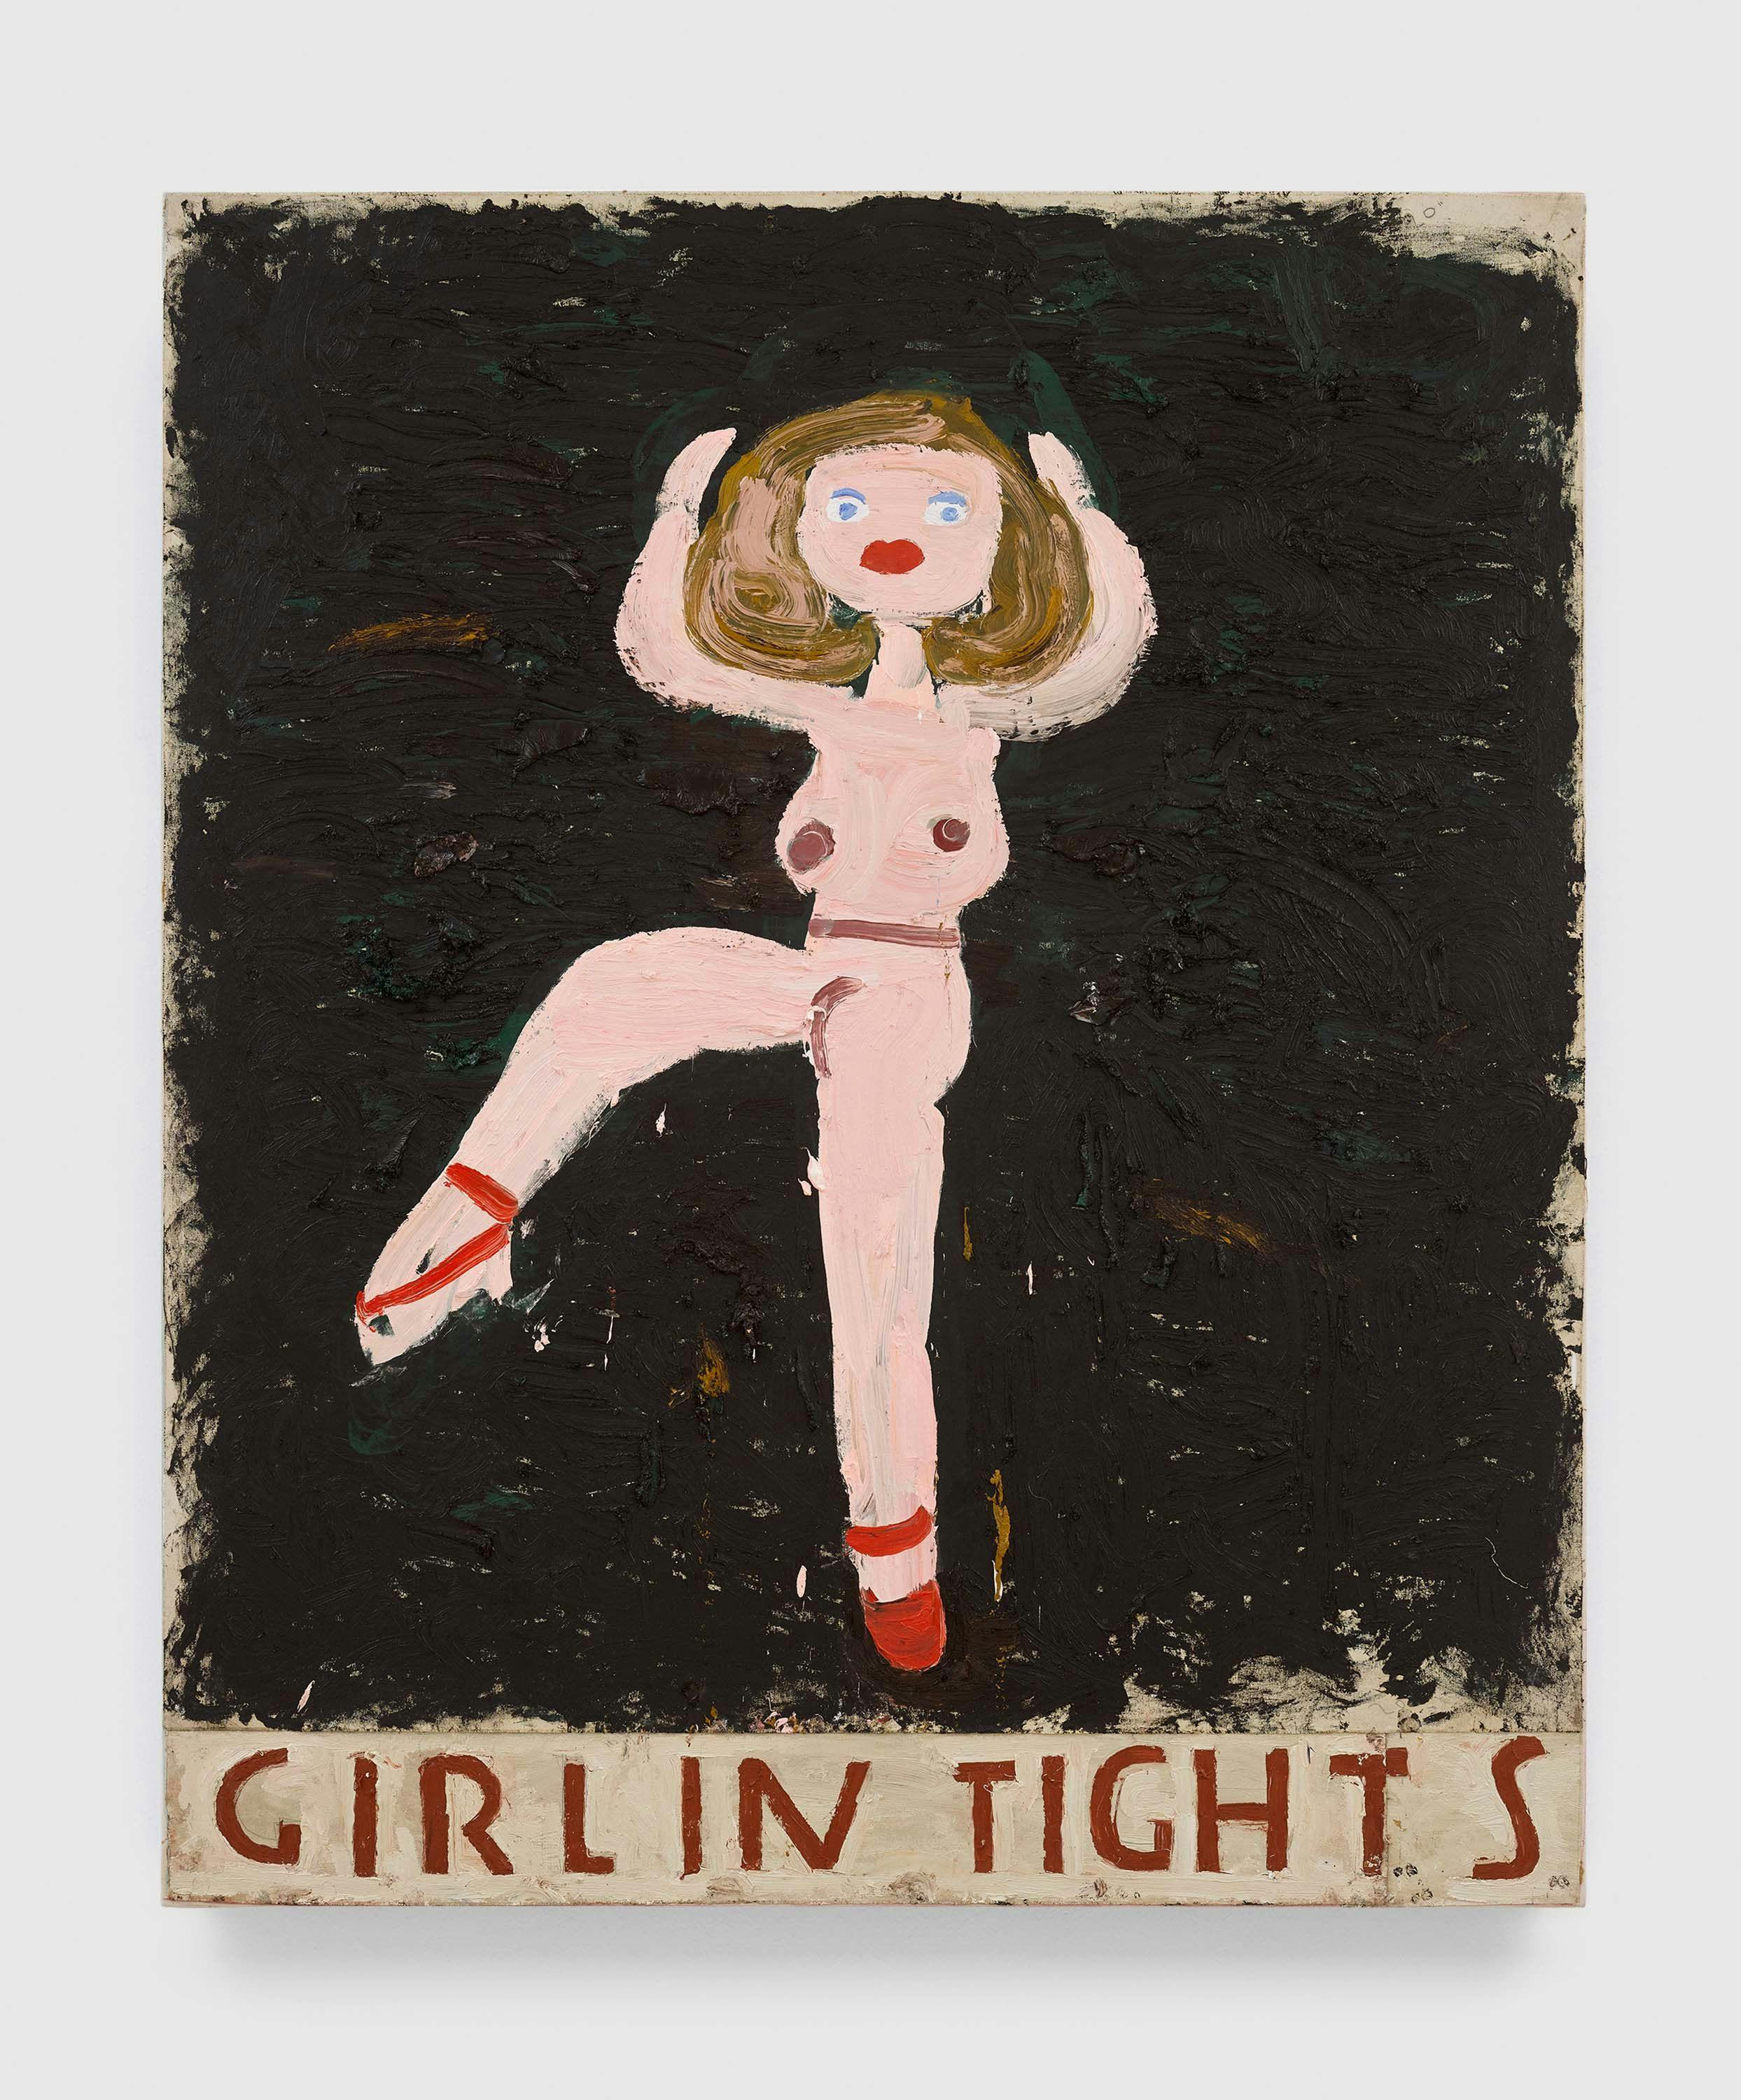 A painting by Rose Wylie, titled Girl in Tights, dated 2019.